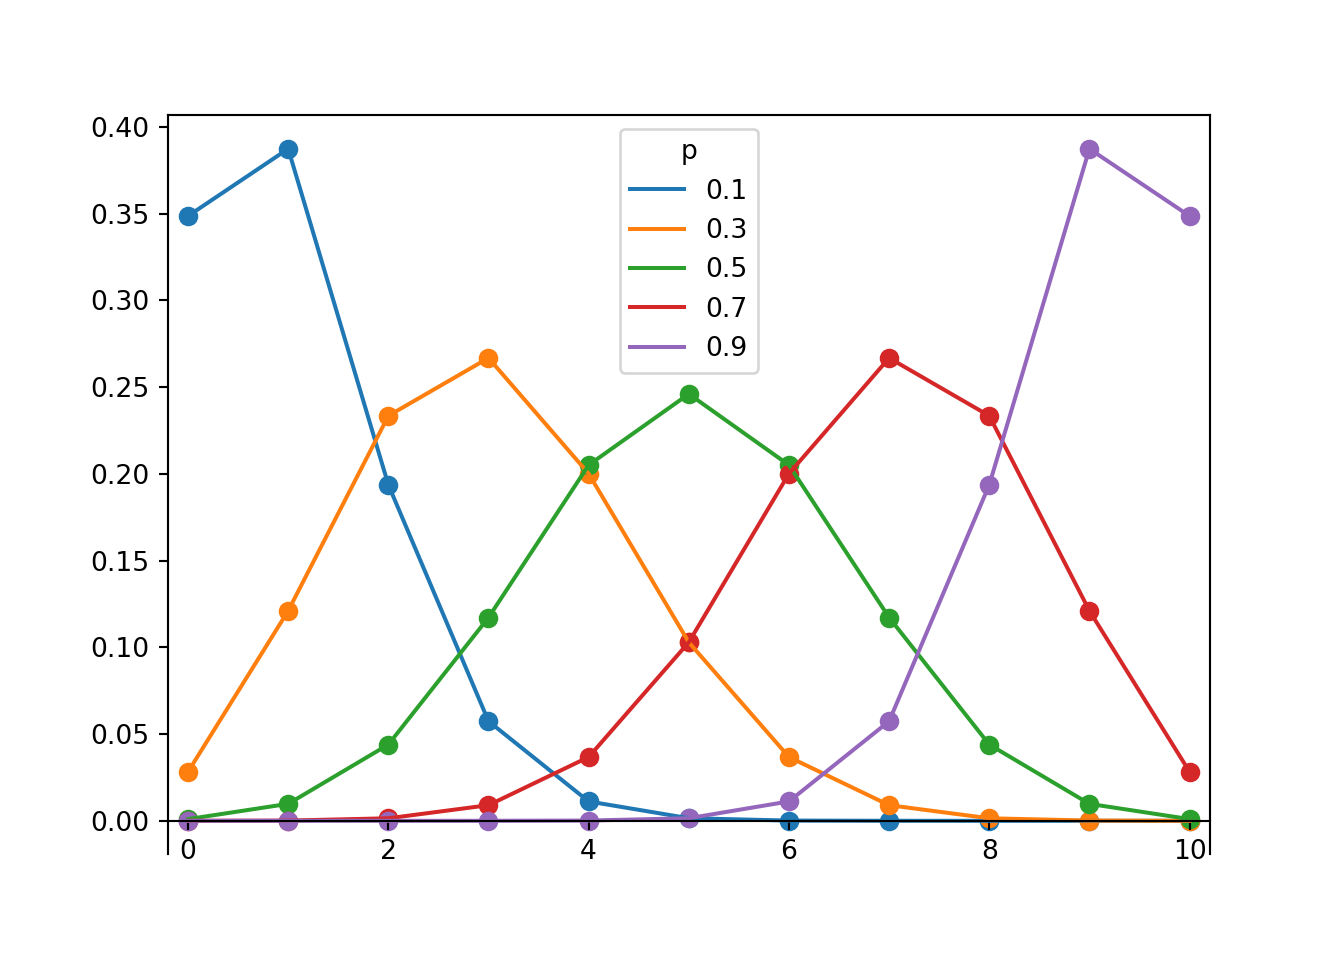 Probability mass functions for Binomial(10, \(p\)) distributions for \(p = 0.1, 0.3, 0.5, 0.7, 0.9\).